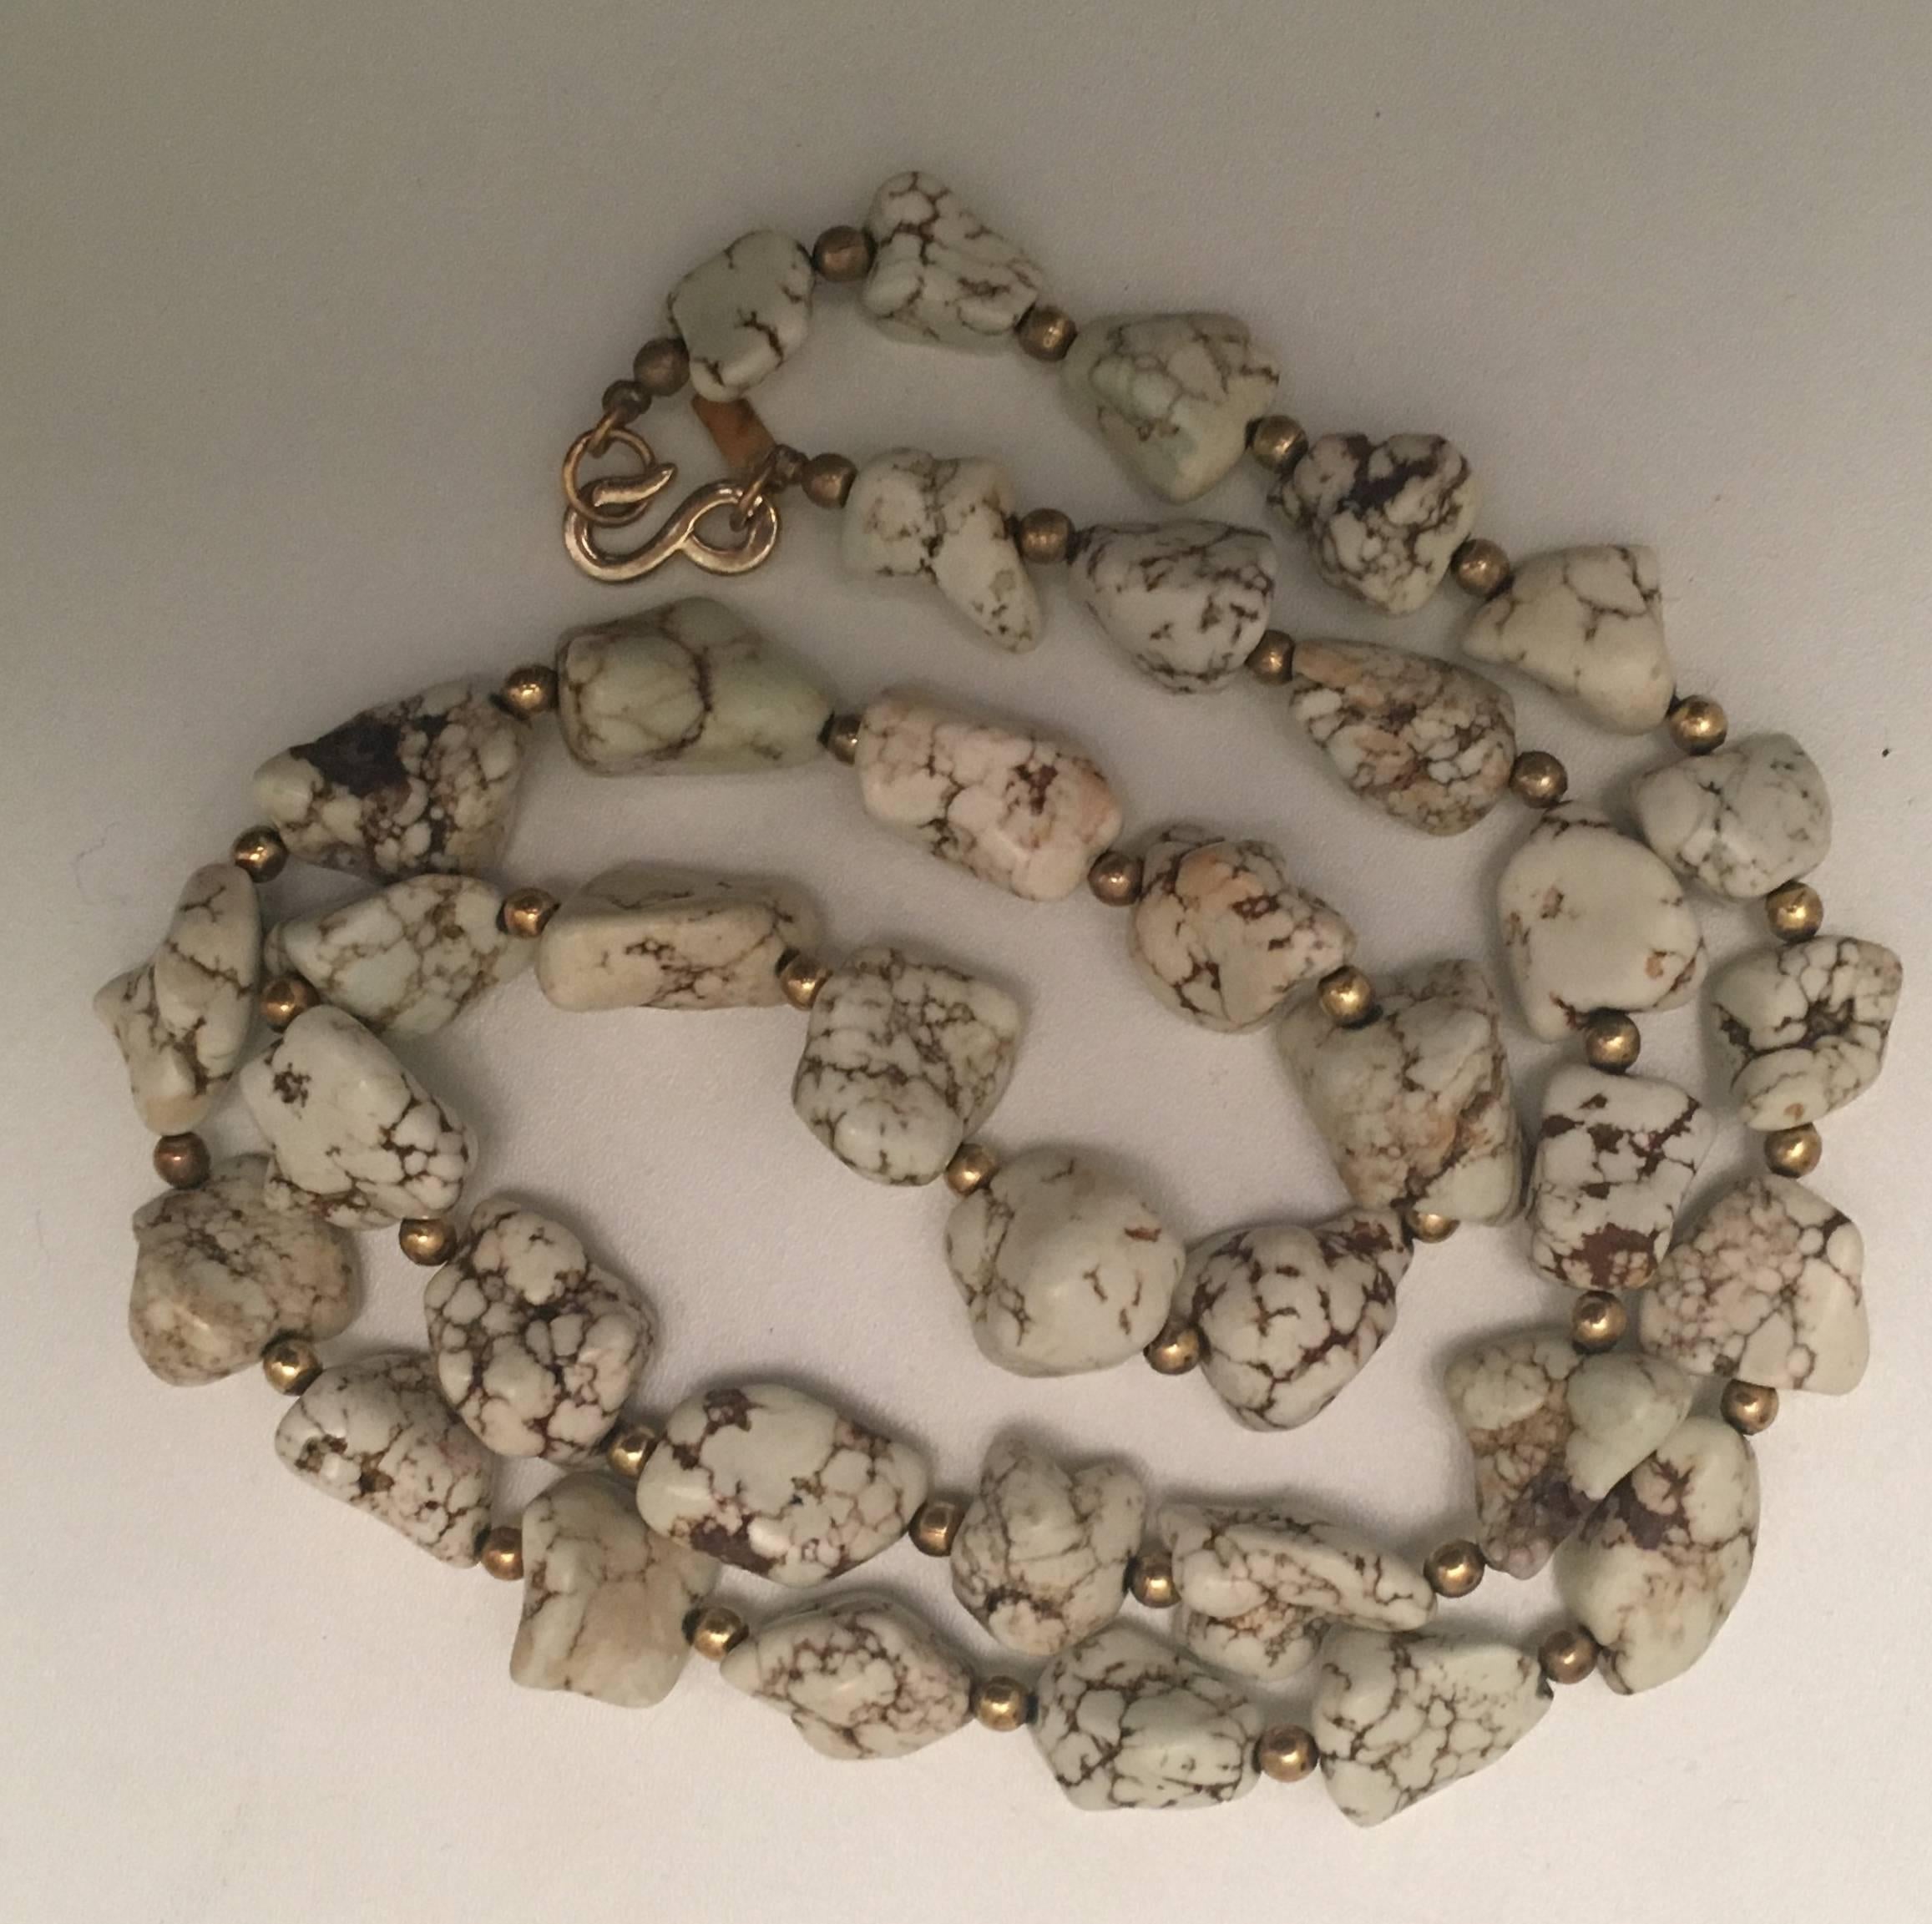 Presented here is a white turquoise stone necklace from Kenneth J. Lane. The necklace is comprised of white turquoise stones threaded onto a necklace with gold tone metal beads in between each stone. The necklace closes with a gold tone metal hook